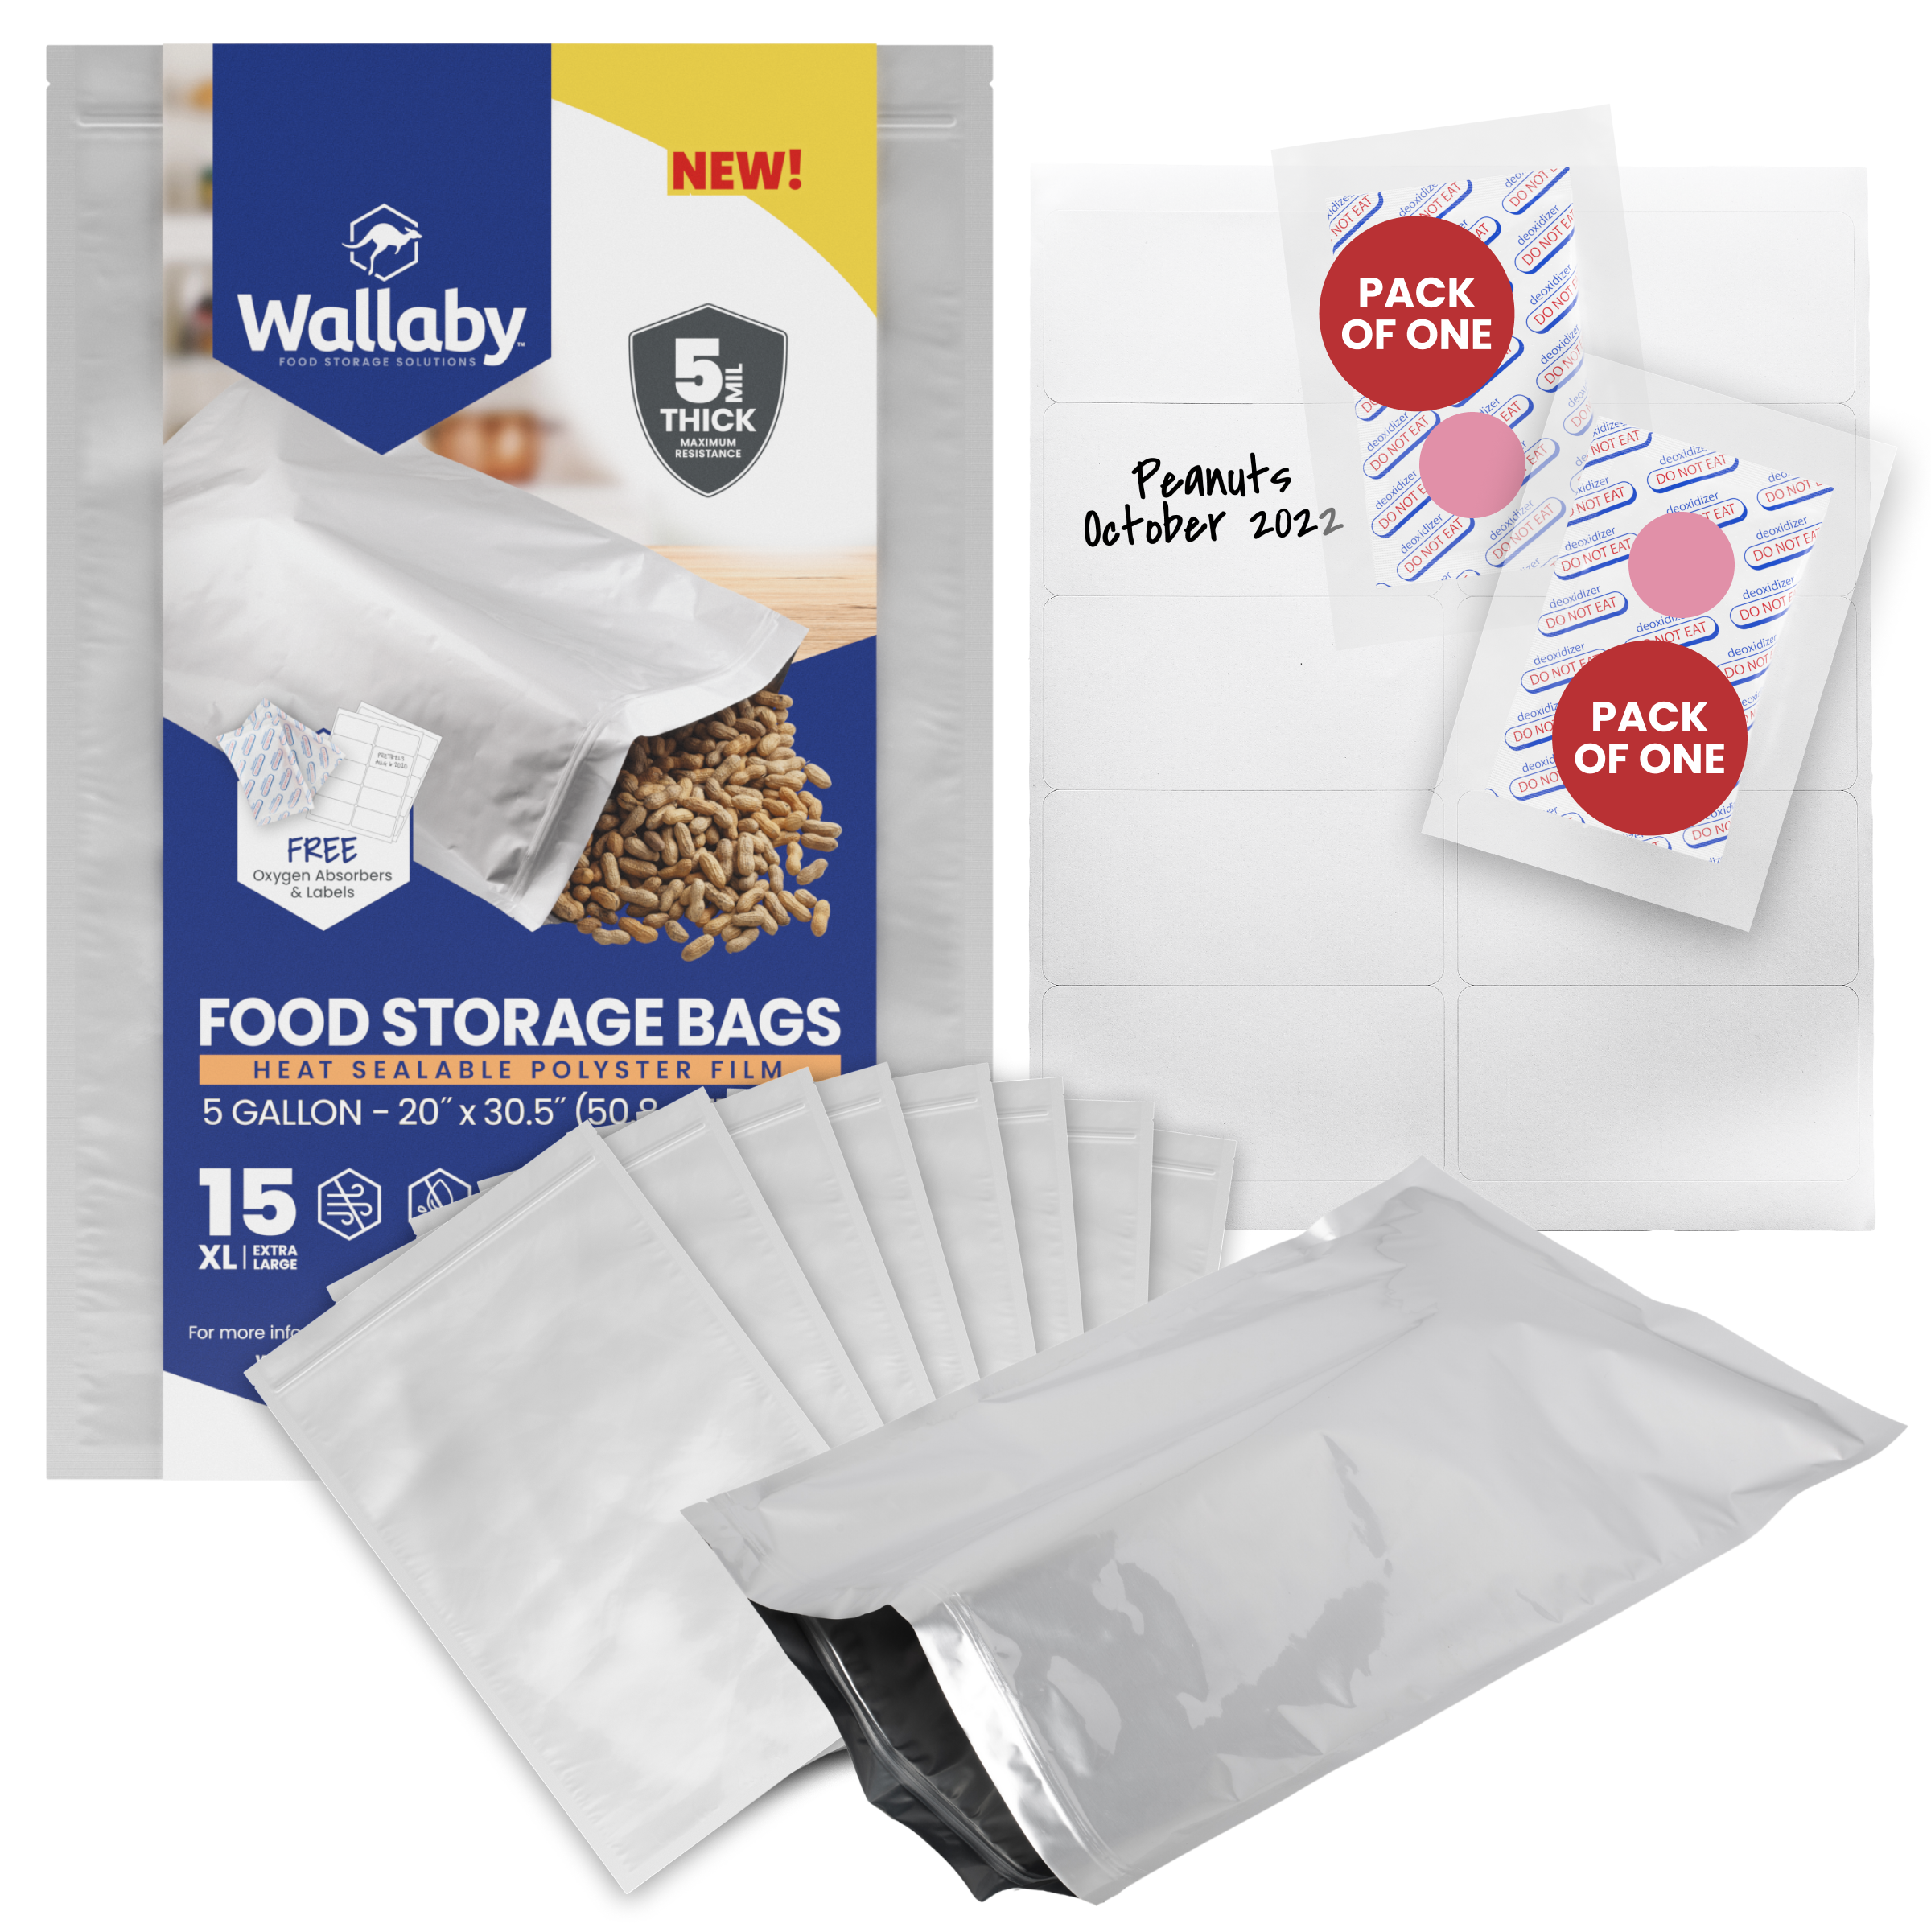 Food Storage for Long Term: Vacuum Sealers, Mylar Bags and Oxygen Absorbers  - Preparing for shtf